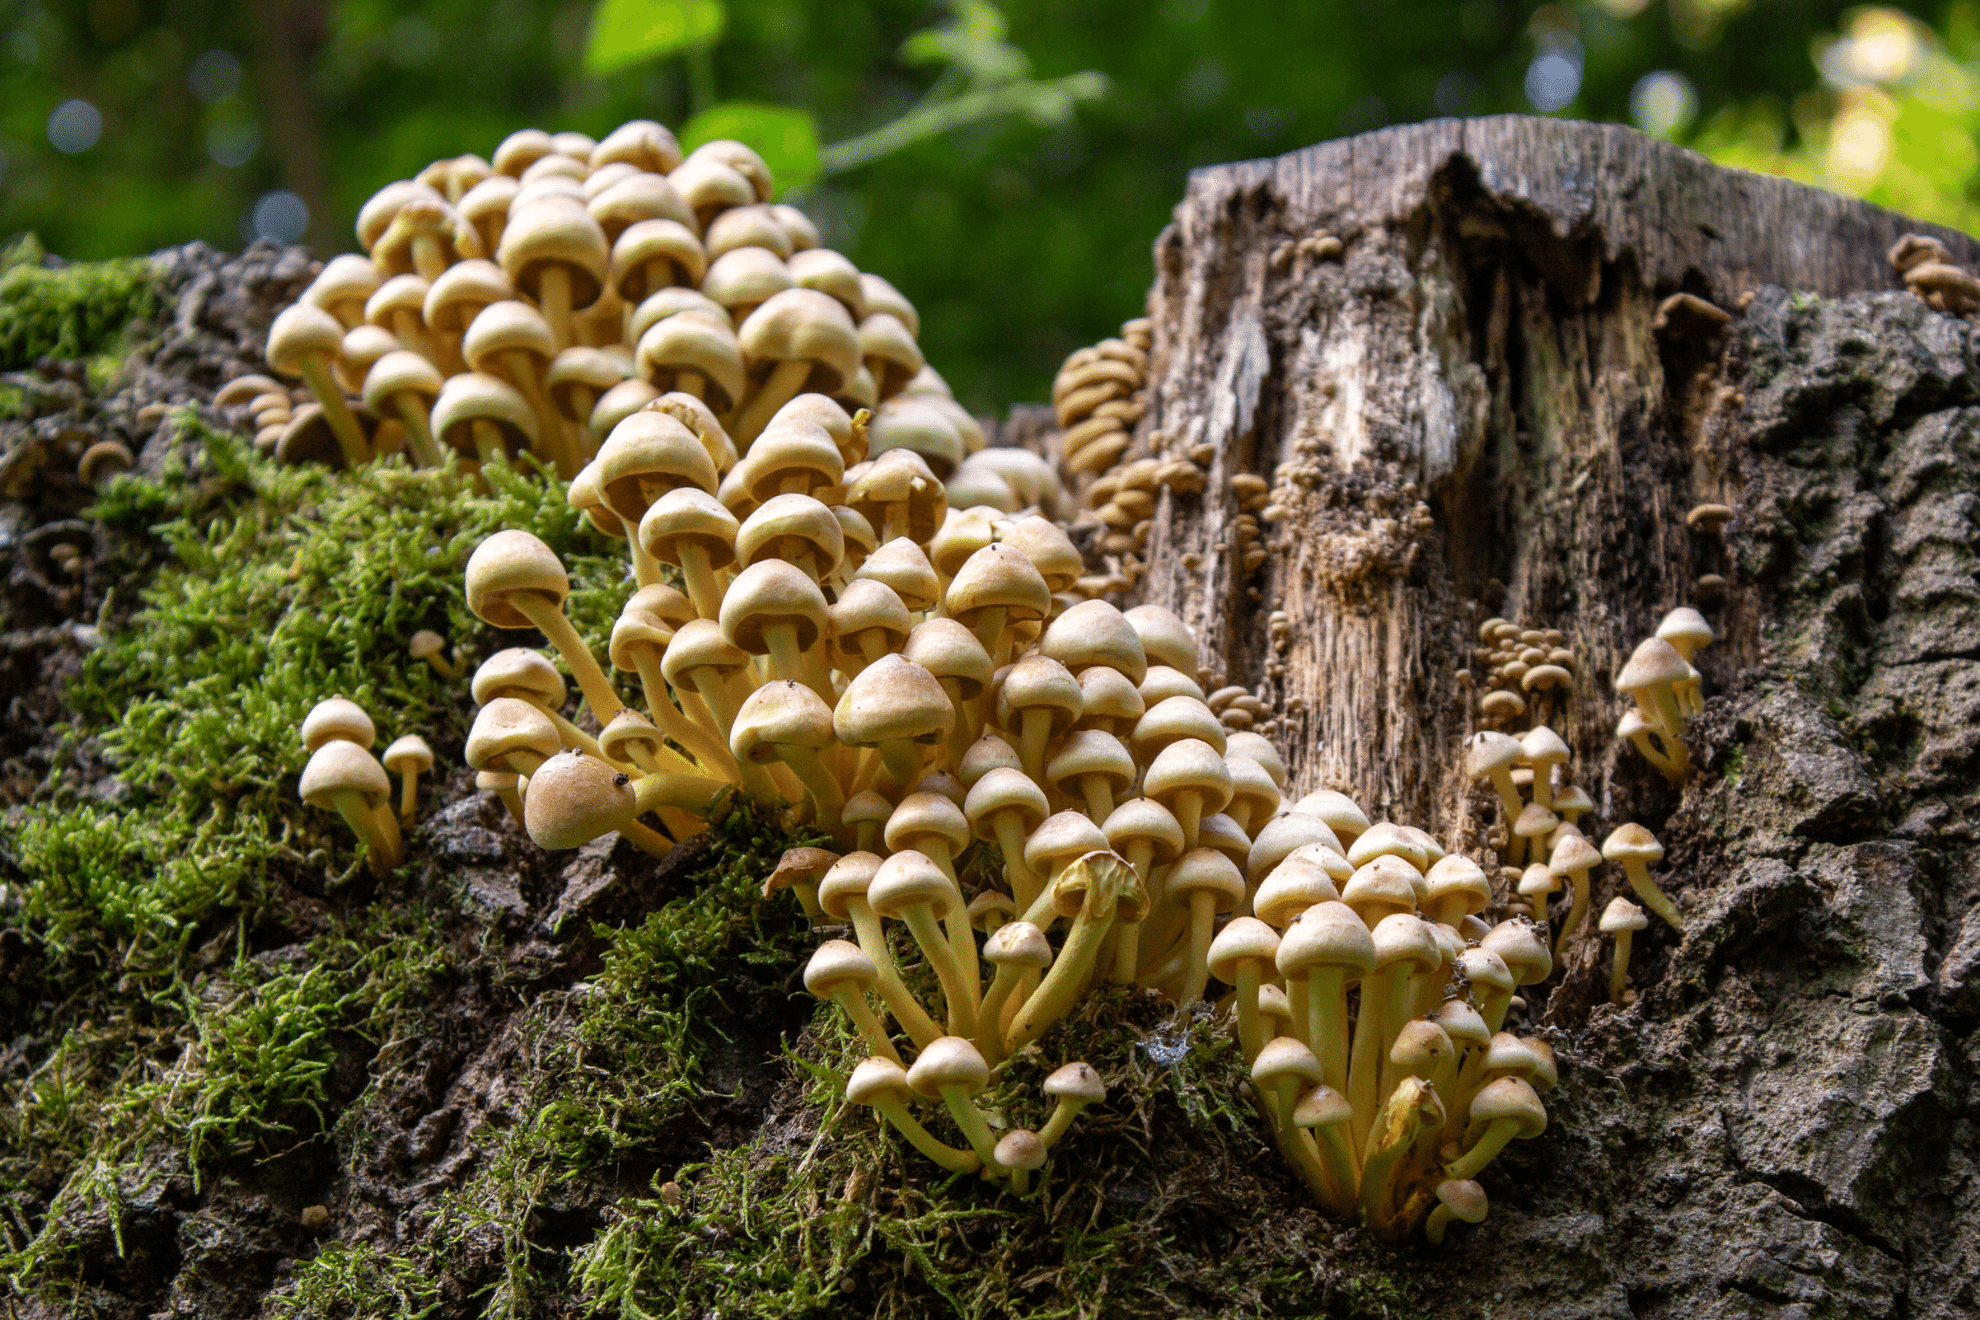 A group of small, light brown mushrooms growing up a mossy log in a woodland setting.